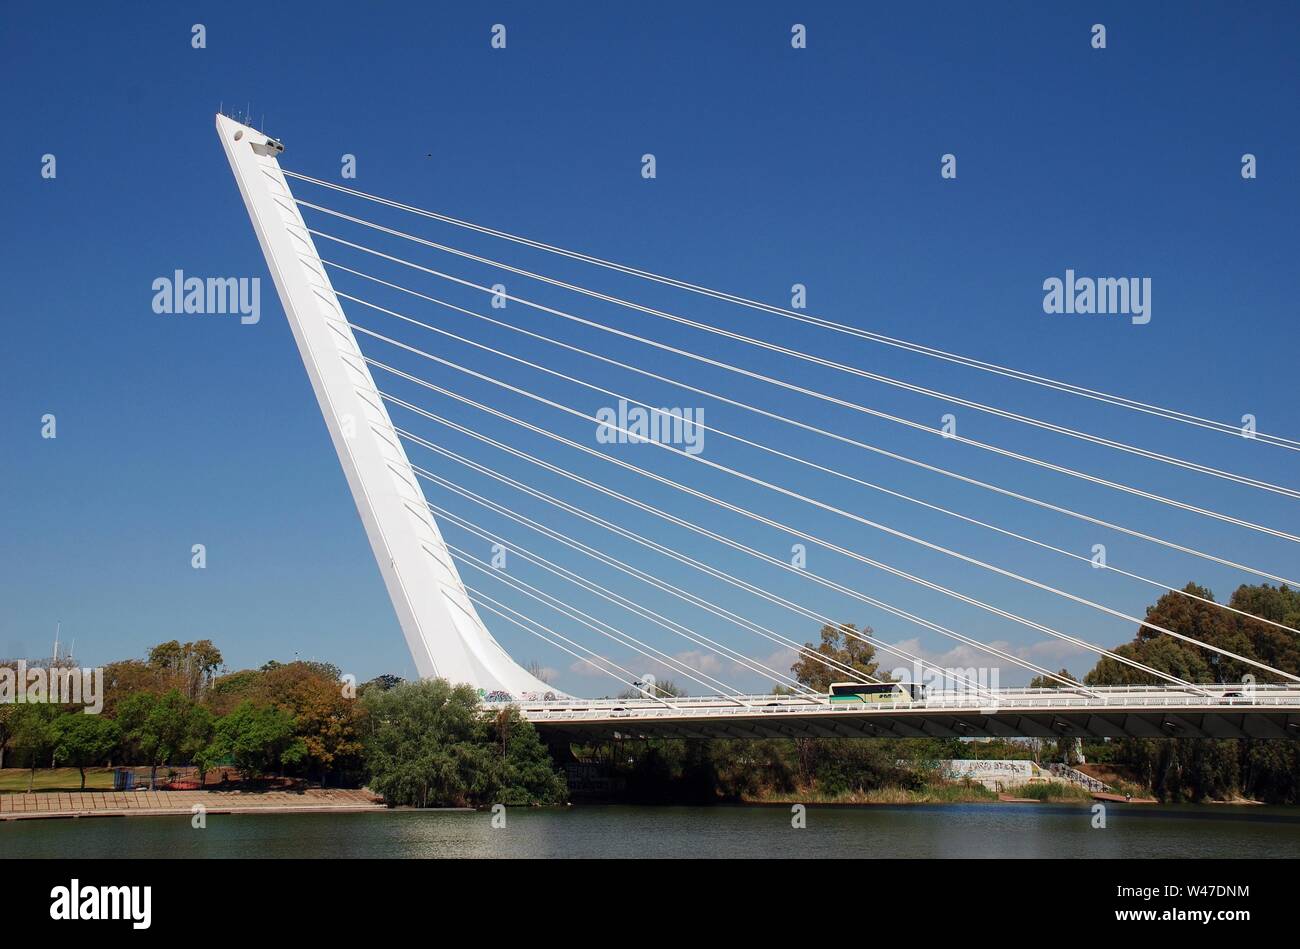 The Puente del Alamillo in Seville, Spain on April 3, 2019. Designed by Santiago Calatrava, it opened in 1992 for the Universal Exposition. Stock Photo